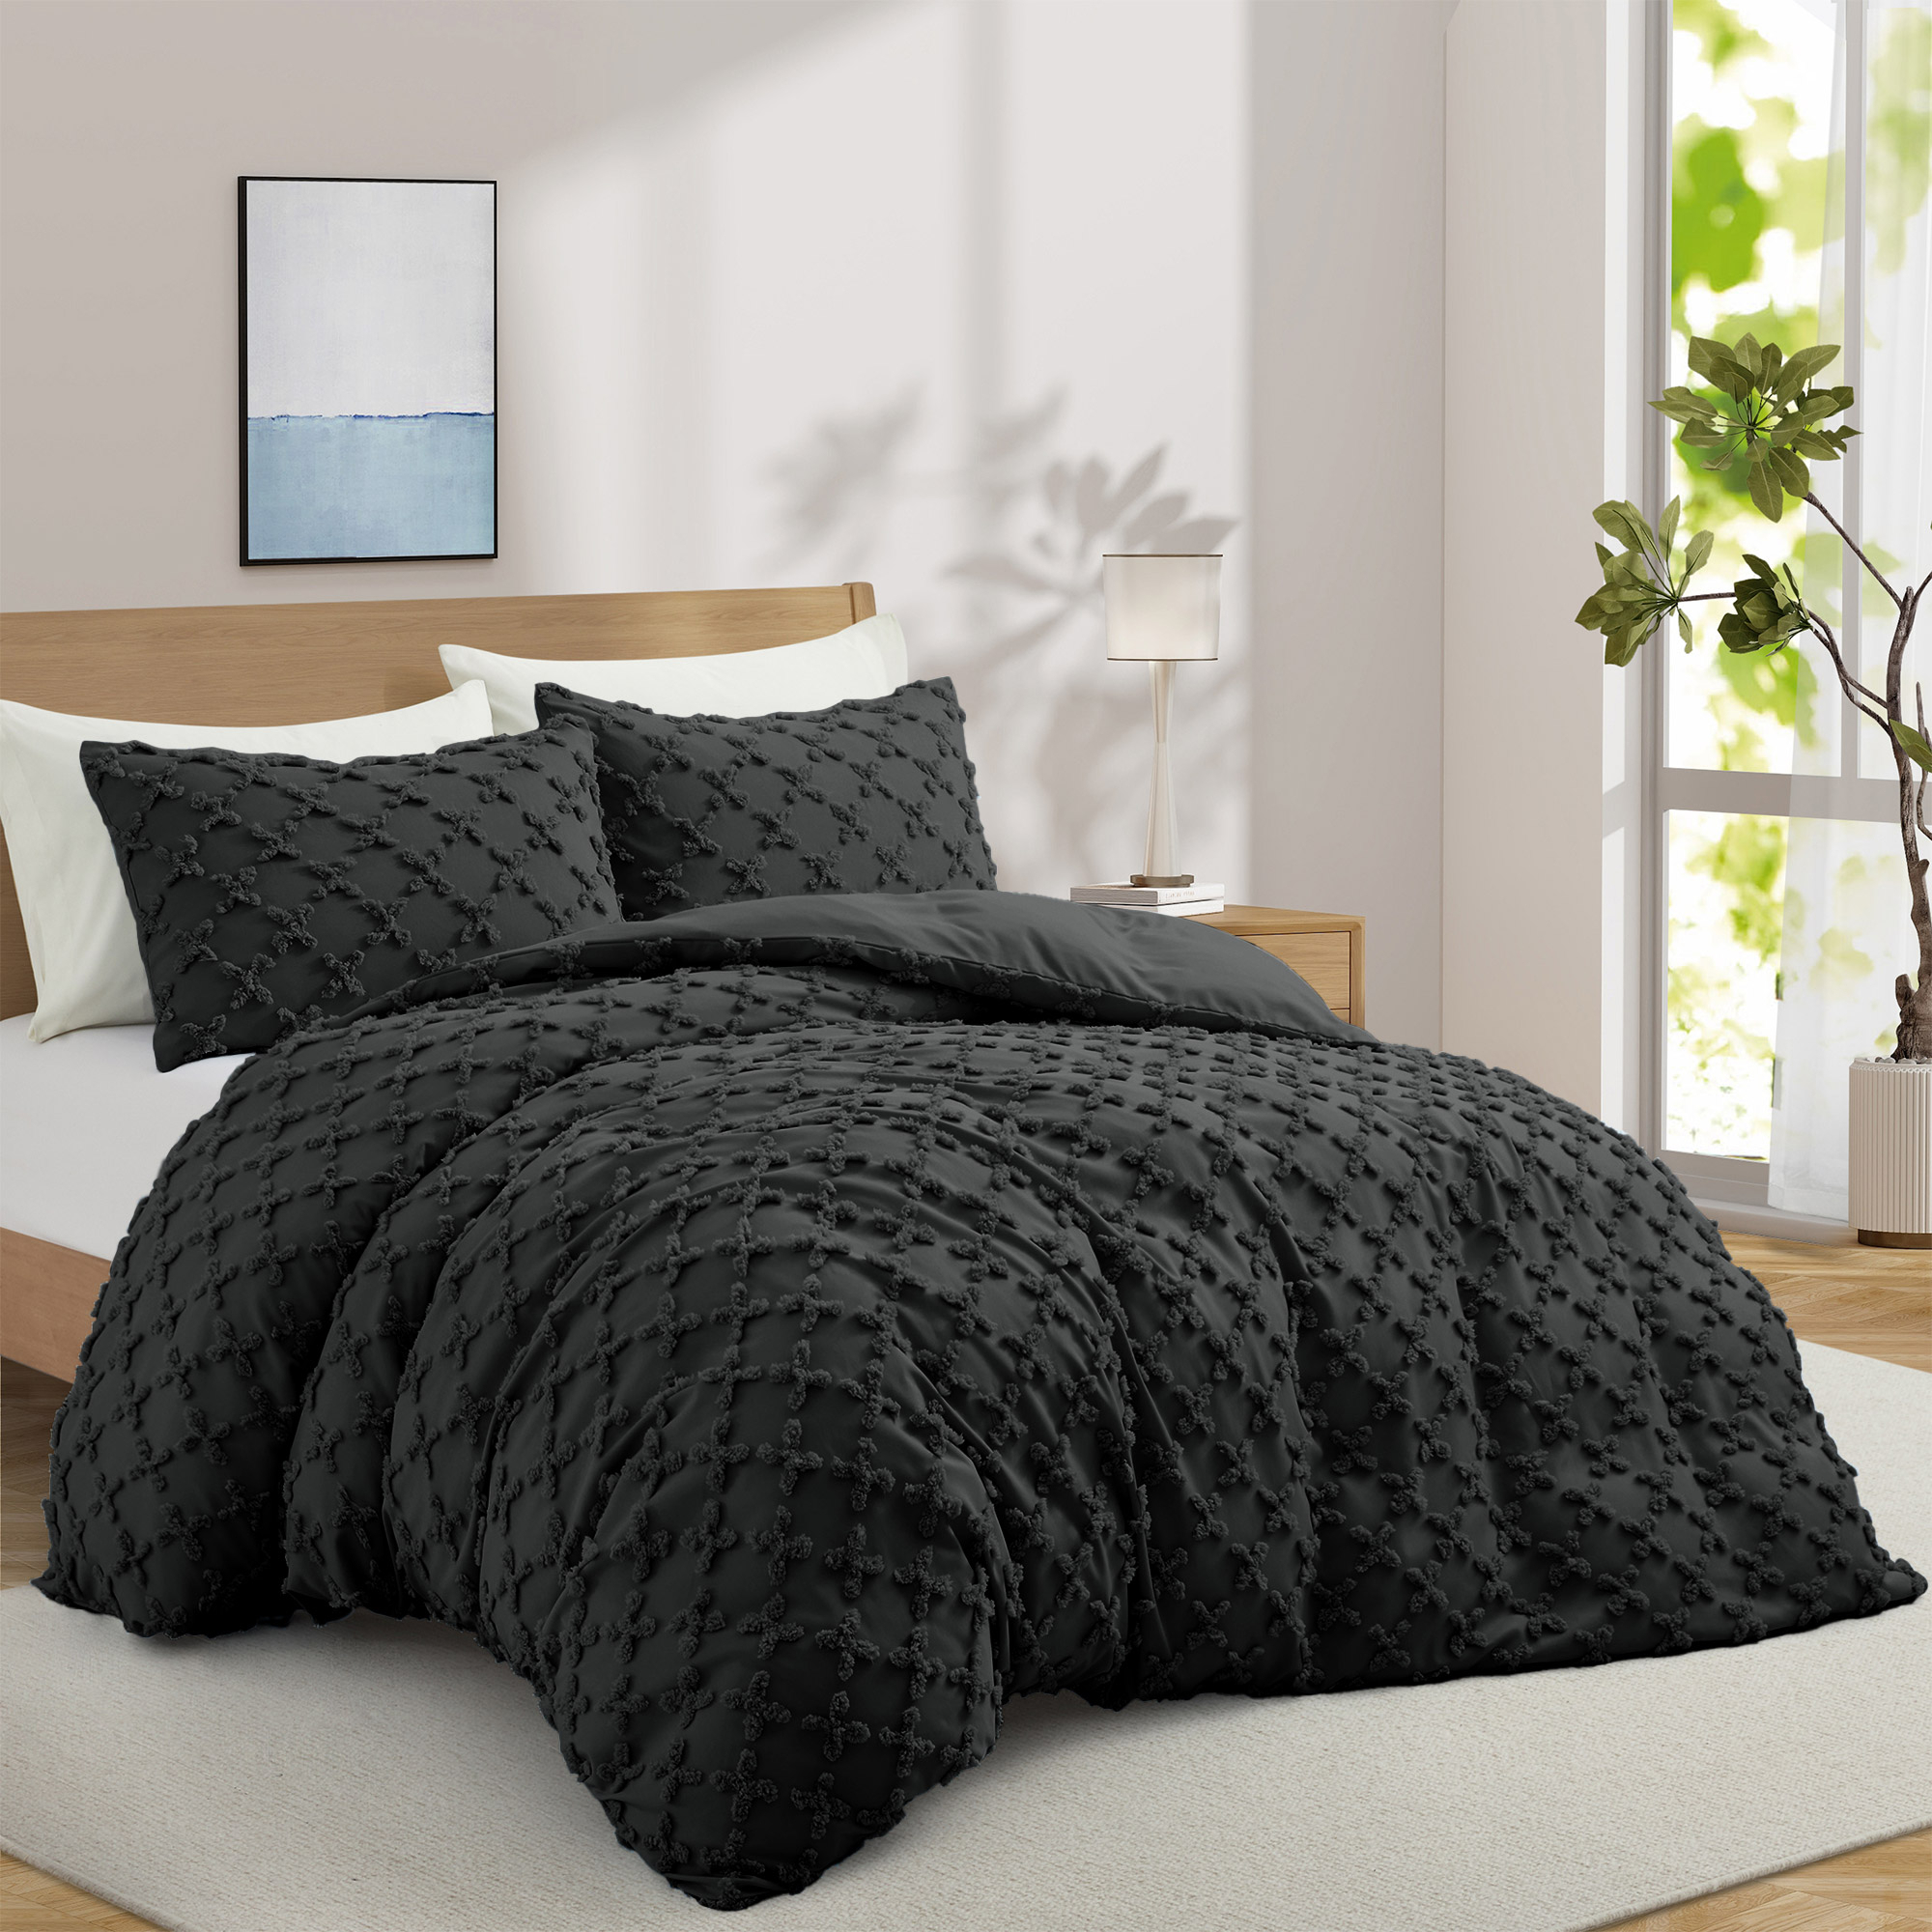 2 Or 3 Piece Soft Microfiber Clipped Duvet Cover Set With Shams - Pirate Black, Full/Queen-90*90